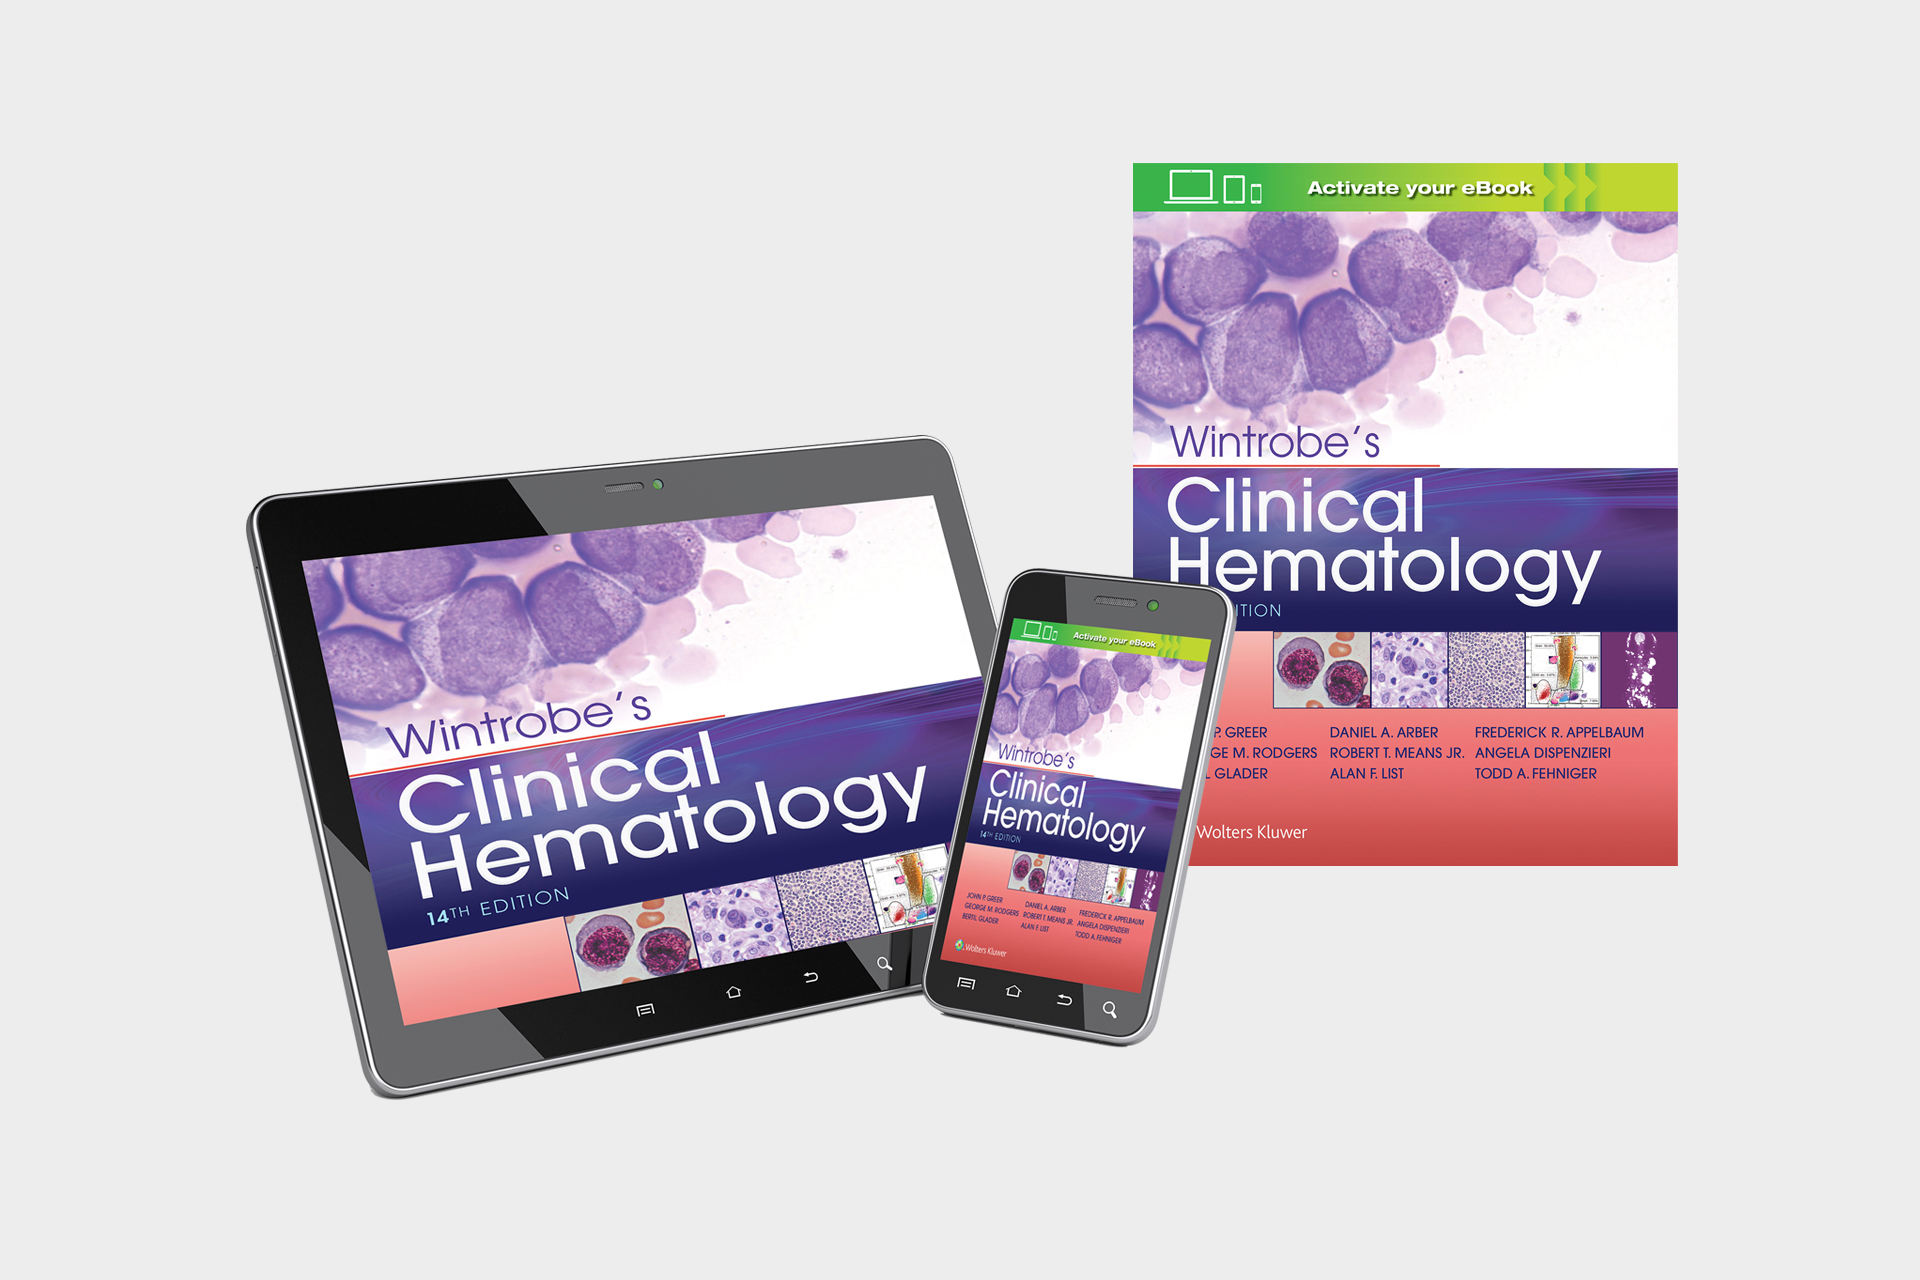 Wintrobe's Clinical Hematology book cover shown in print, on mobile, and on tablet